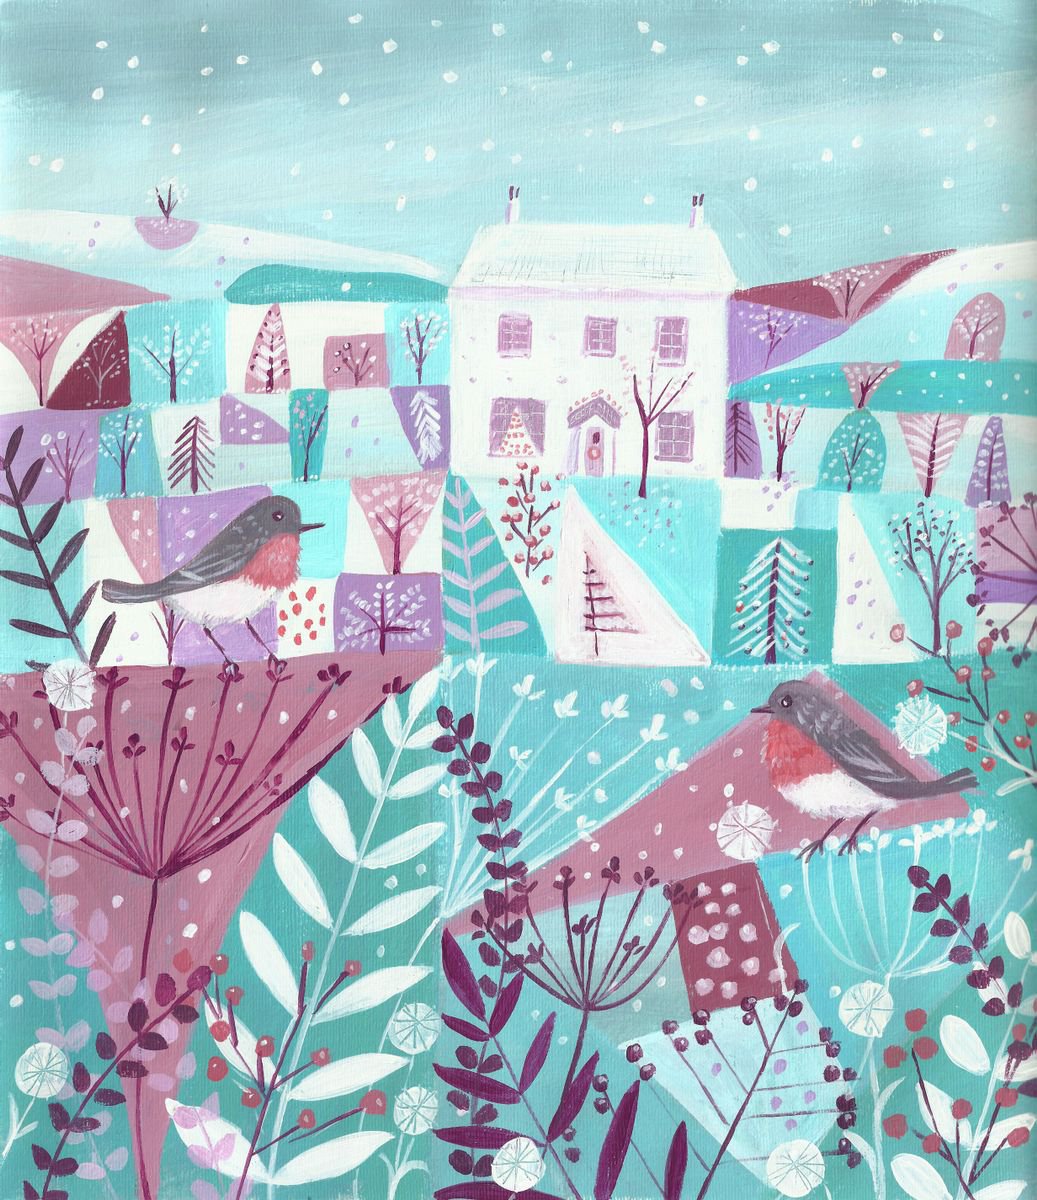 Home for Christmas- winter landscape painting by Mary Stubberfield